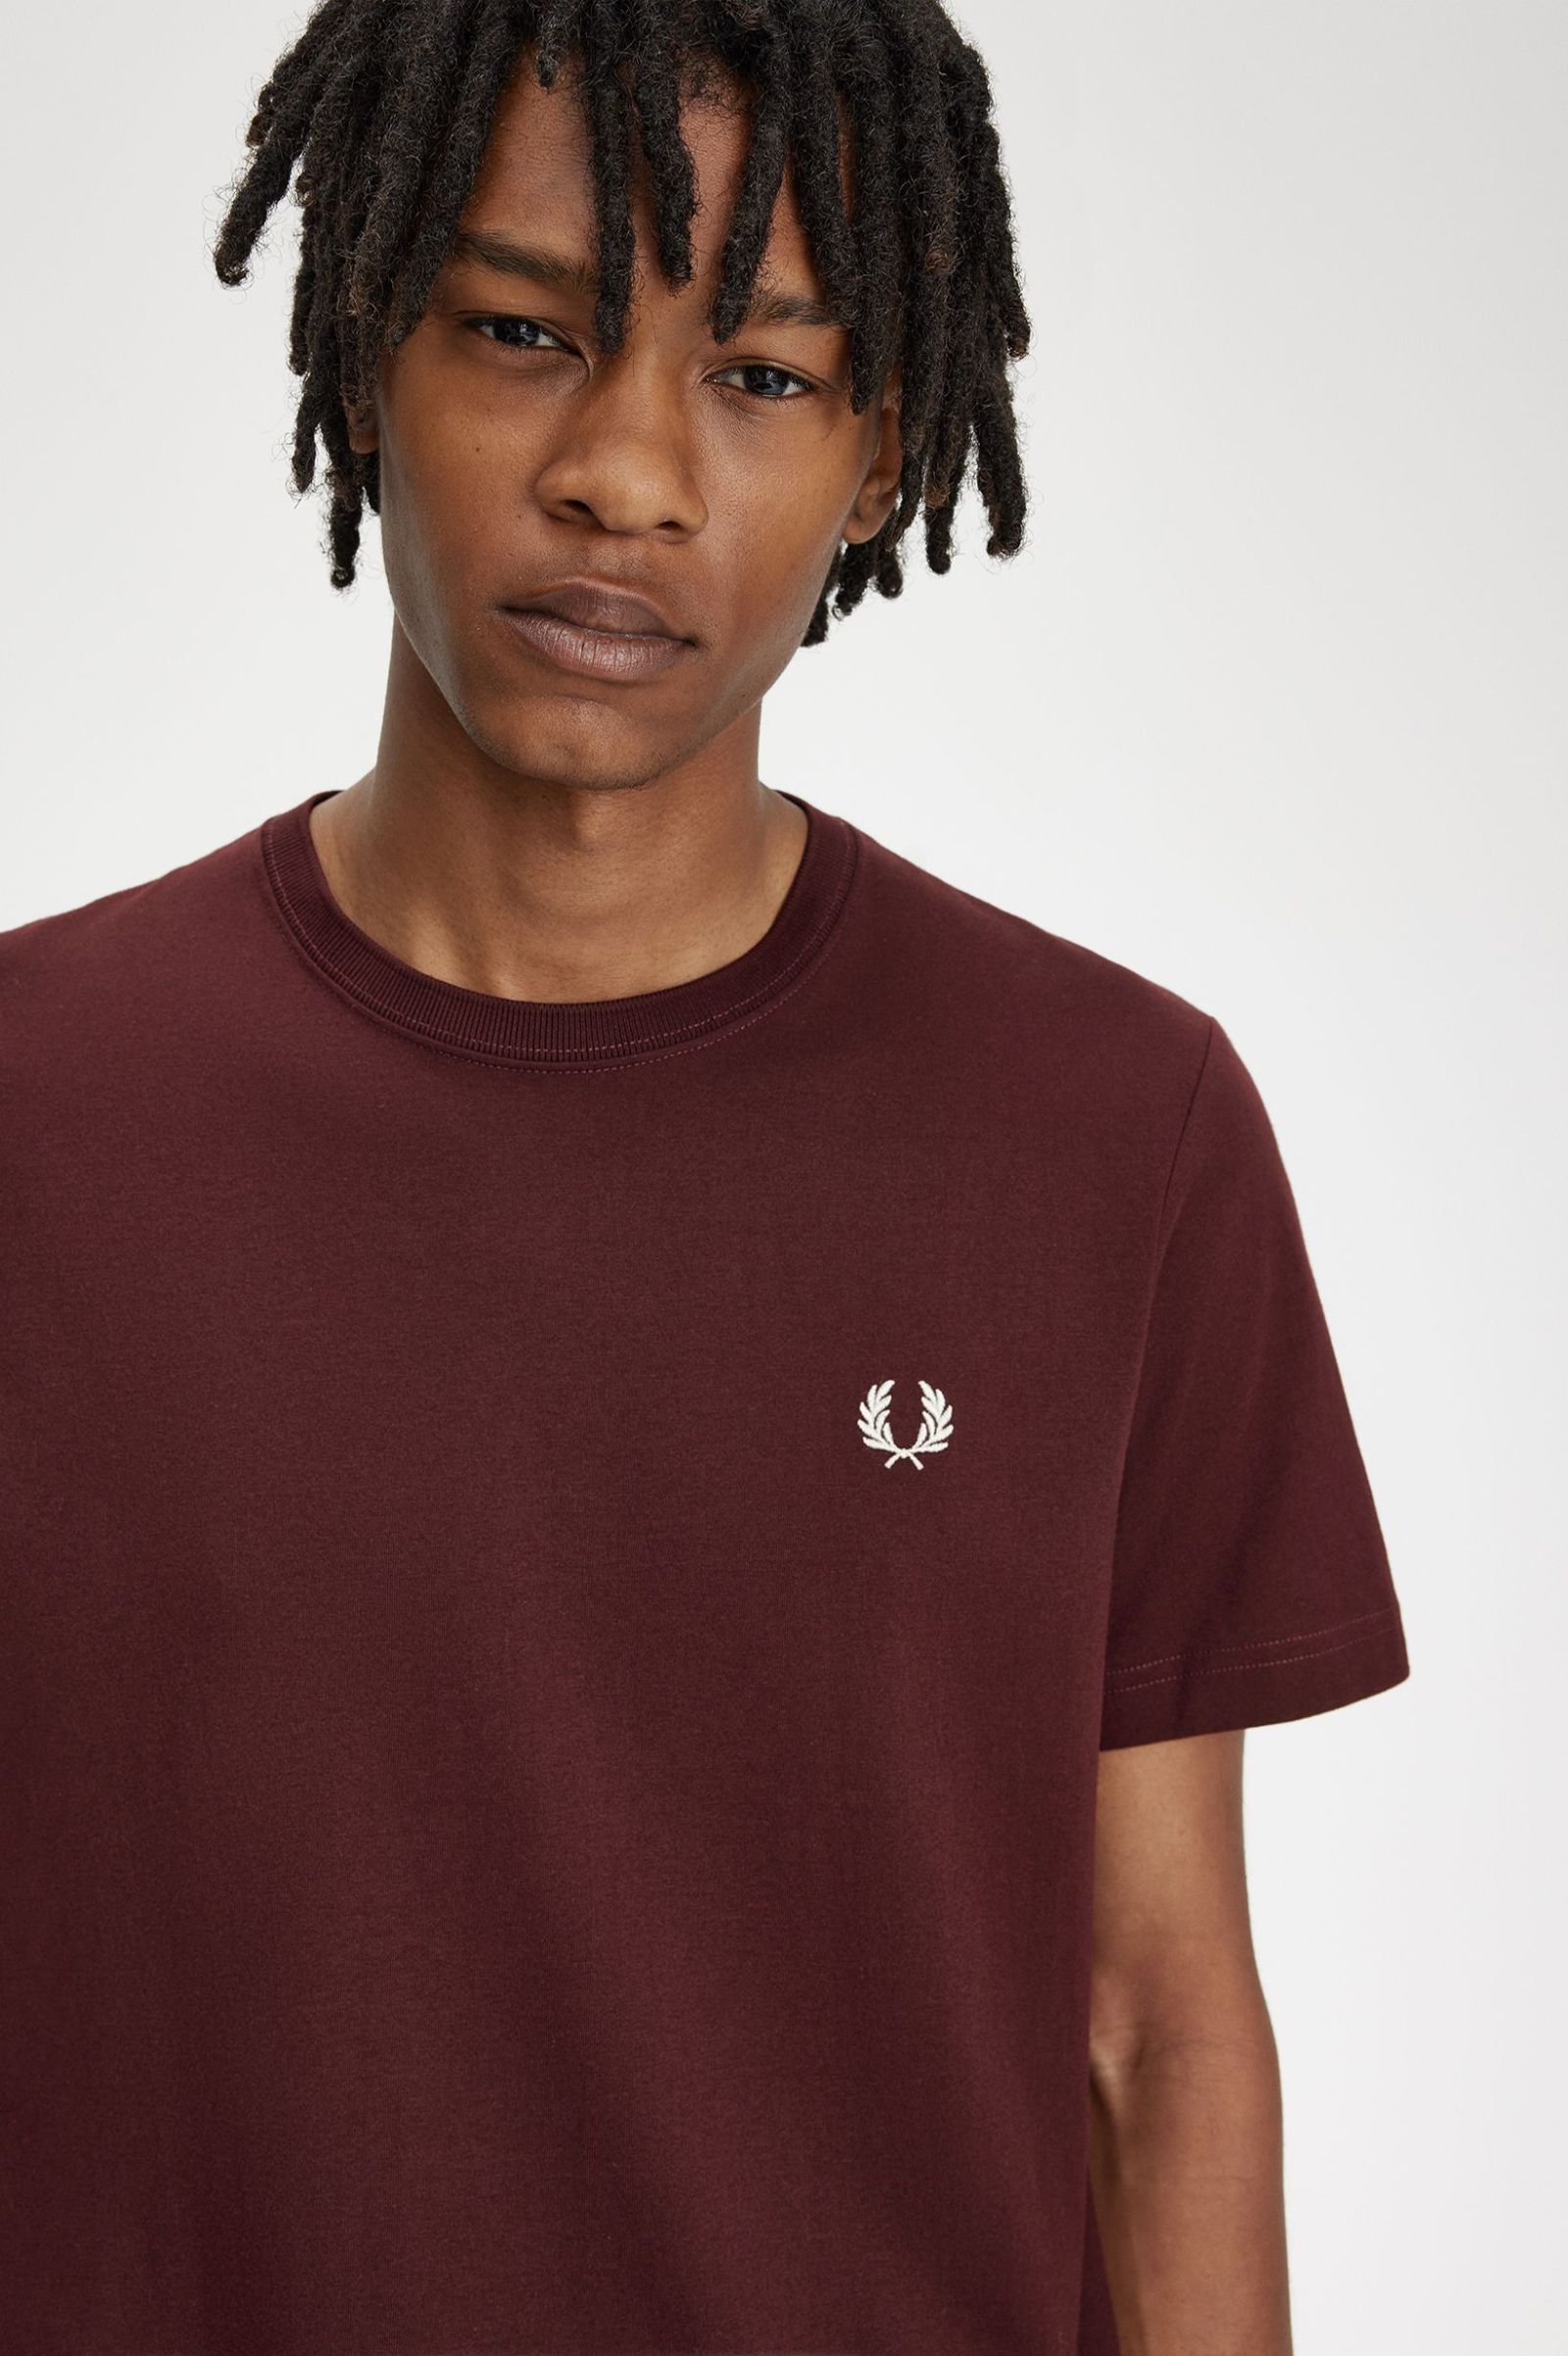 Fred_perry_camisetas